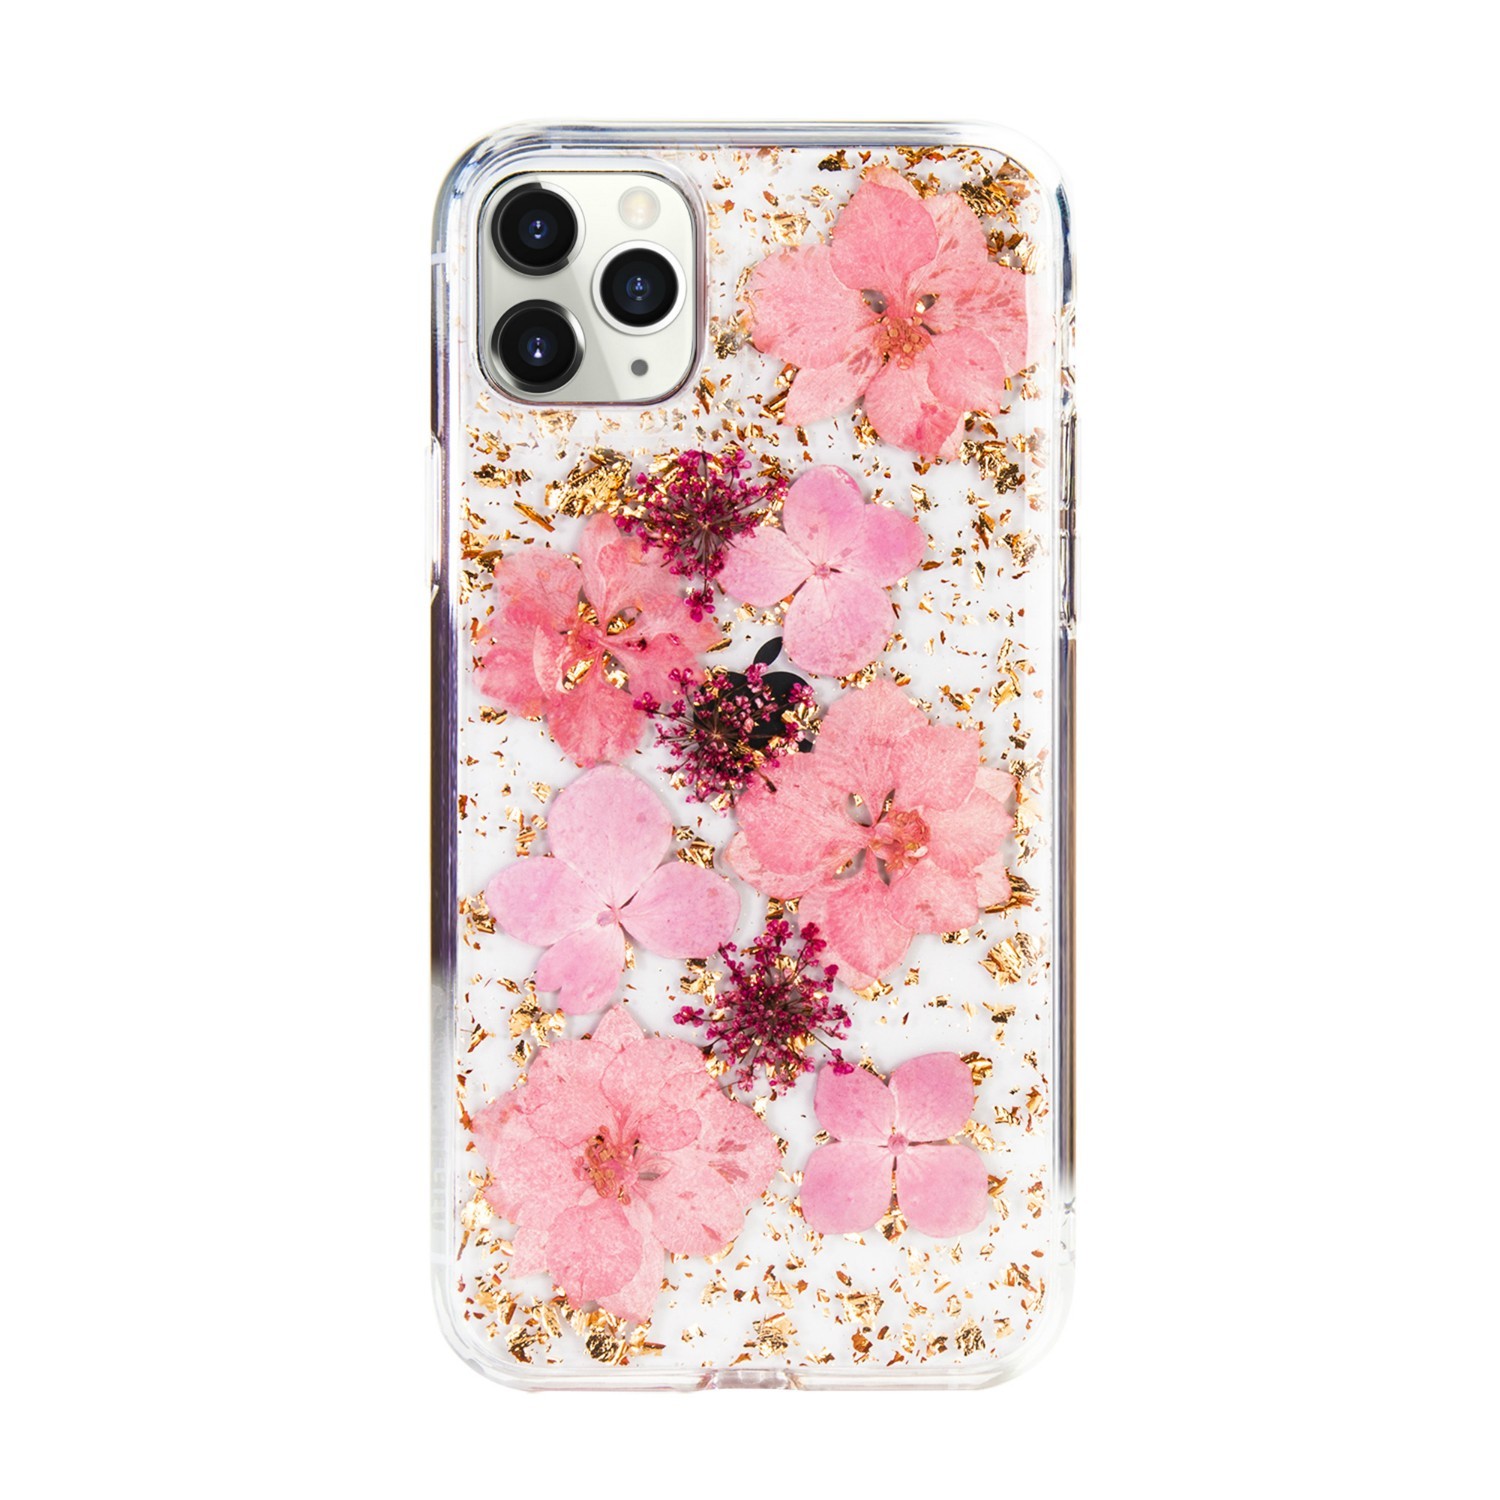 SwitchEasy case for Iphone 11 HANDMADE WITH REAL FLOWERS PINK GS-103-82-160-91